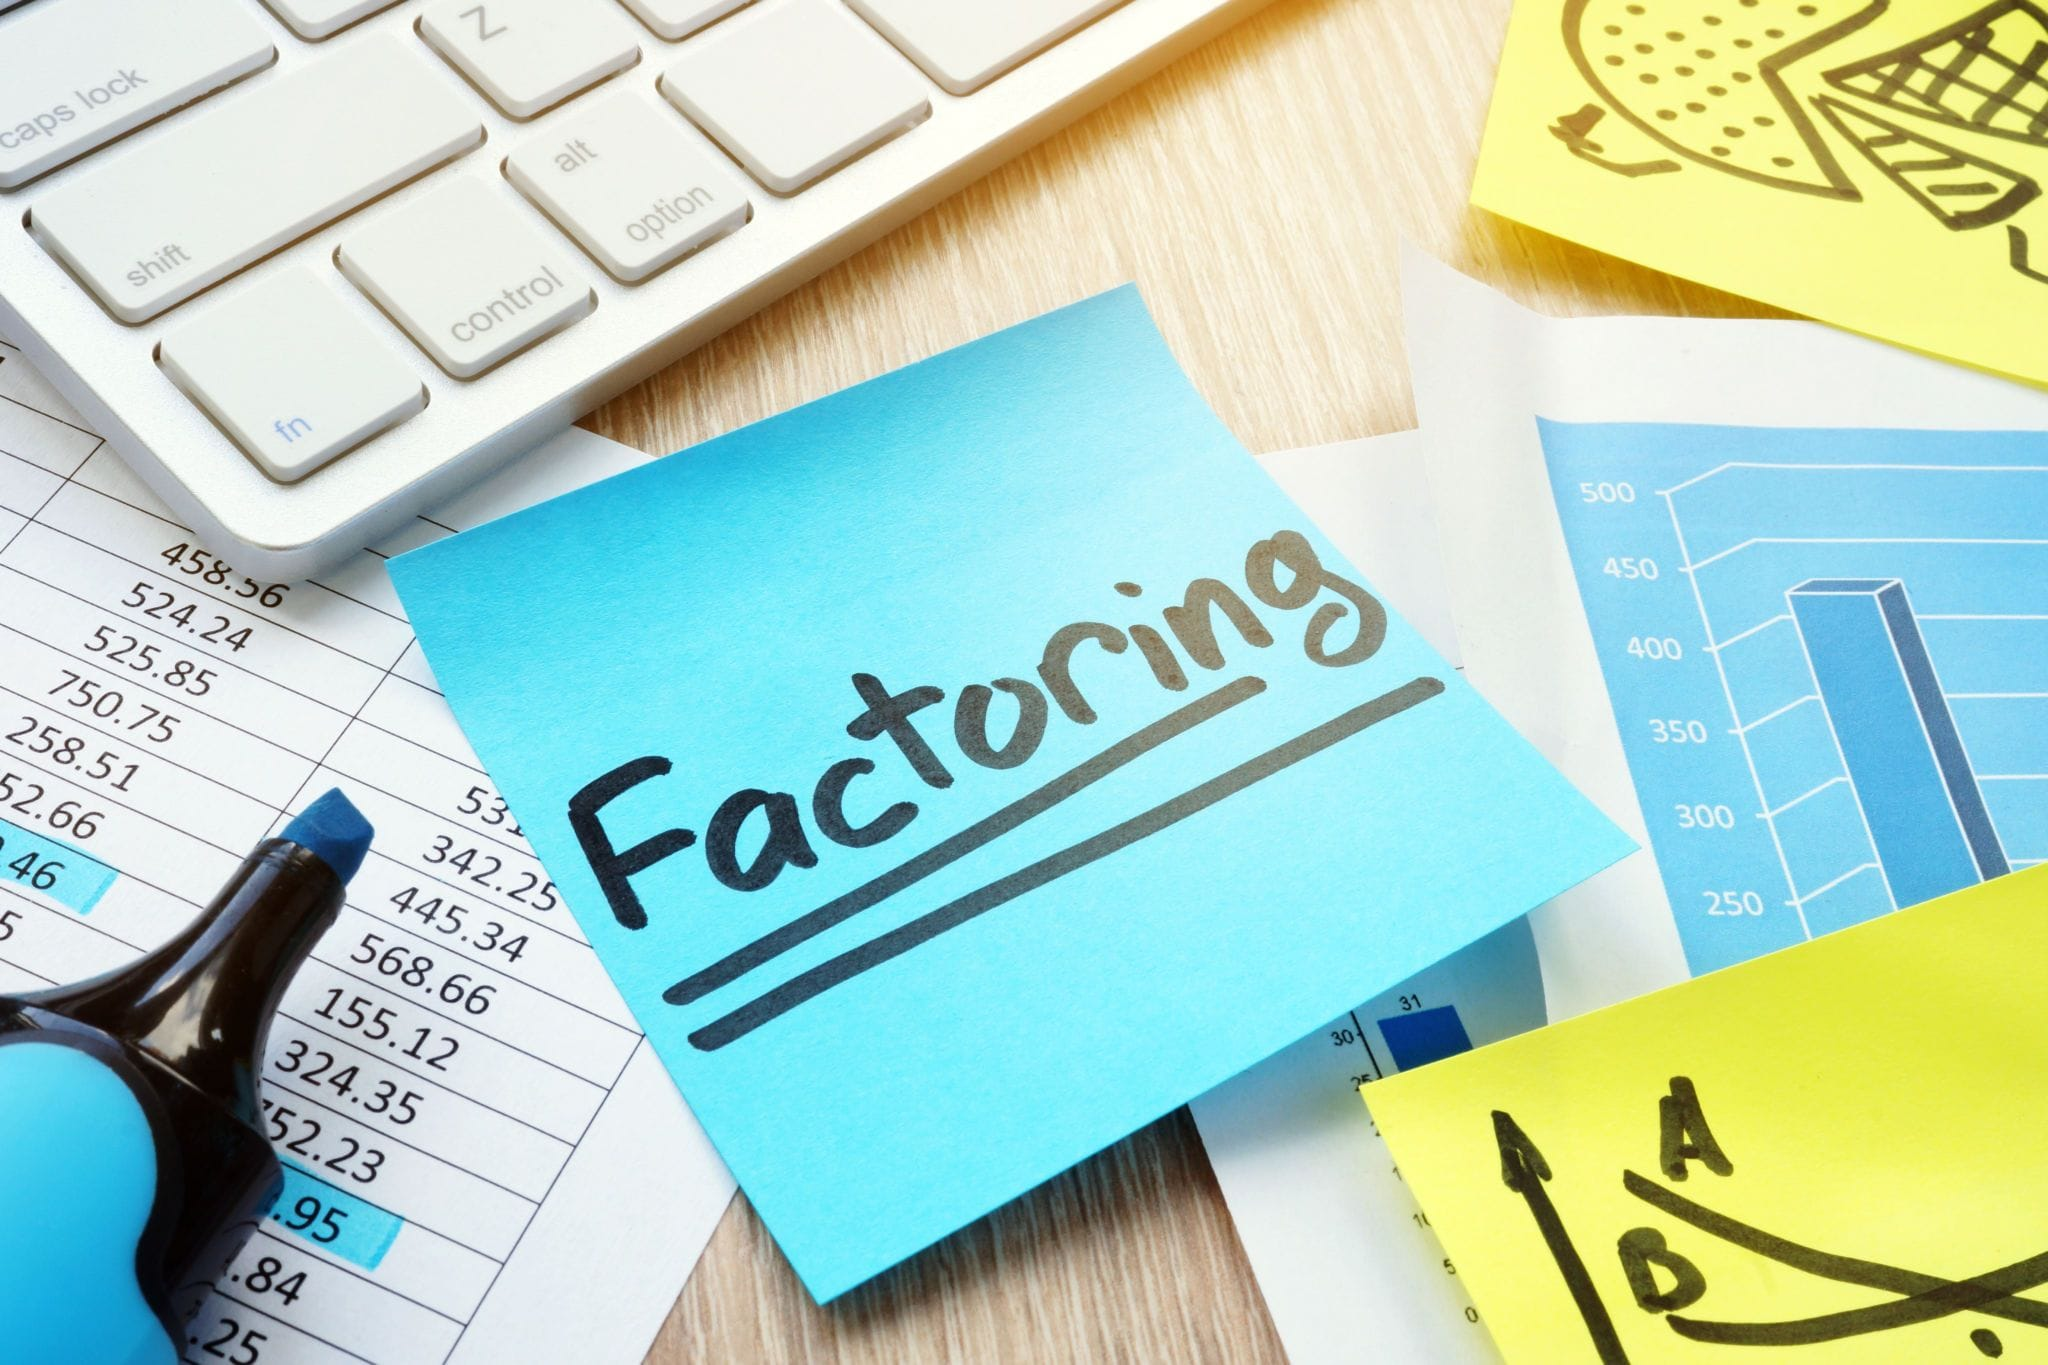 Post-it note with "factoring" written on it near a computer